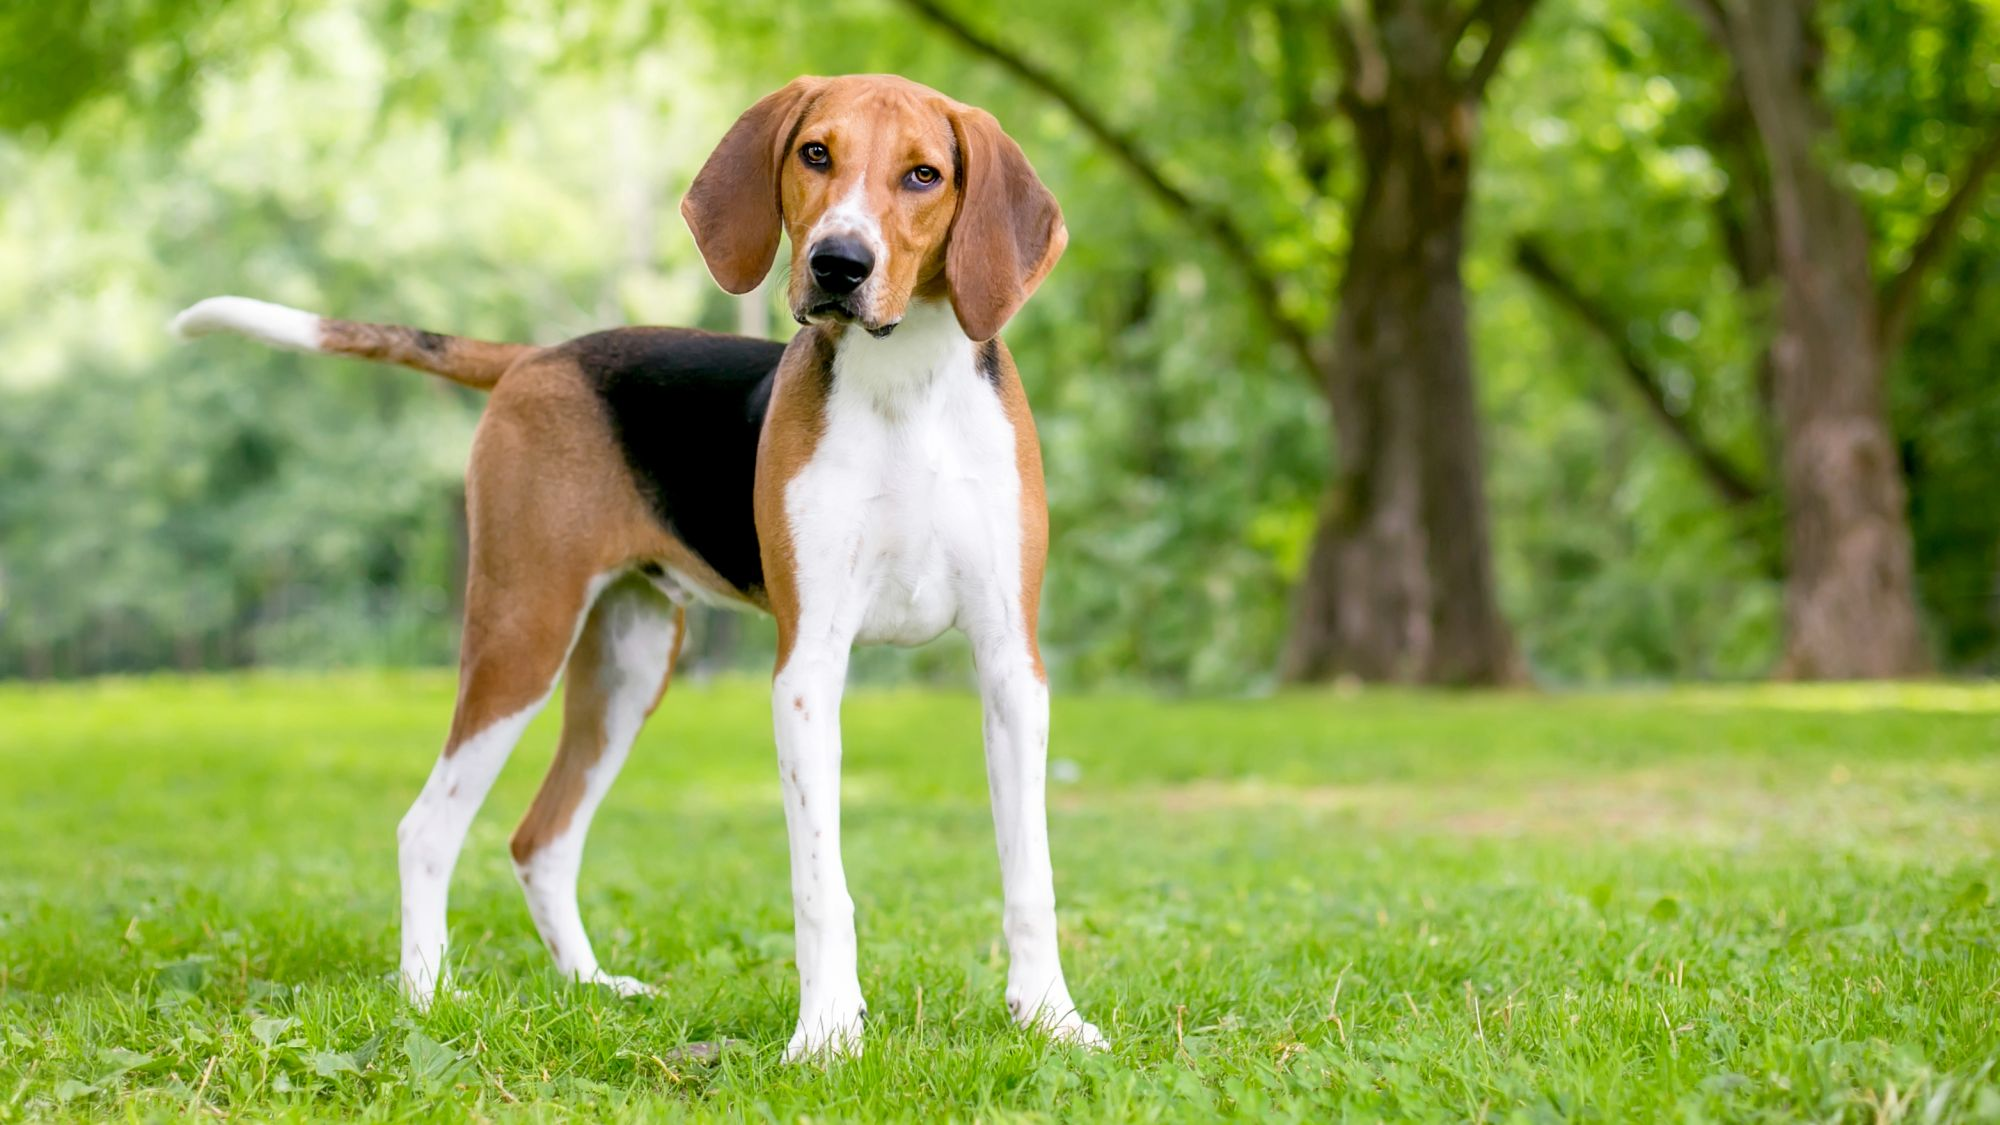 American Foxhound standing on grass